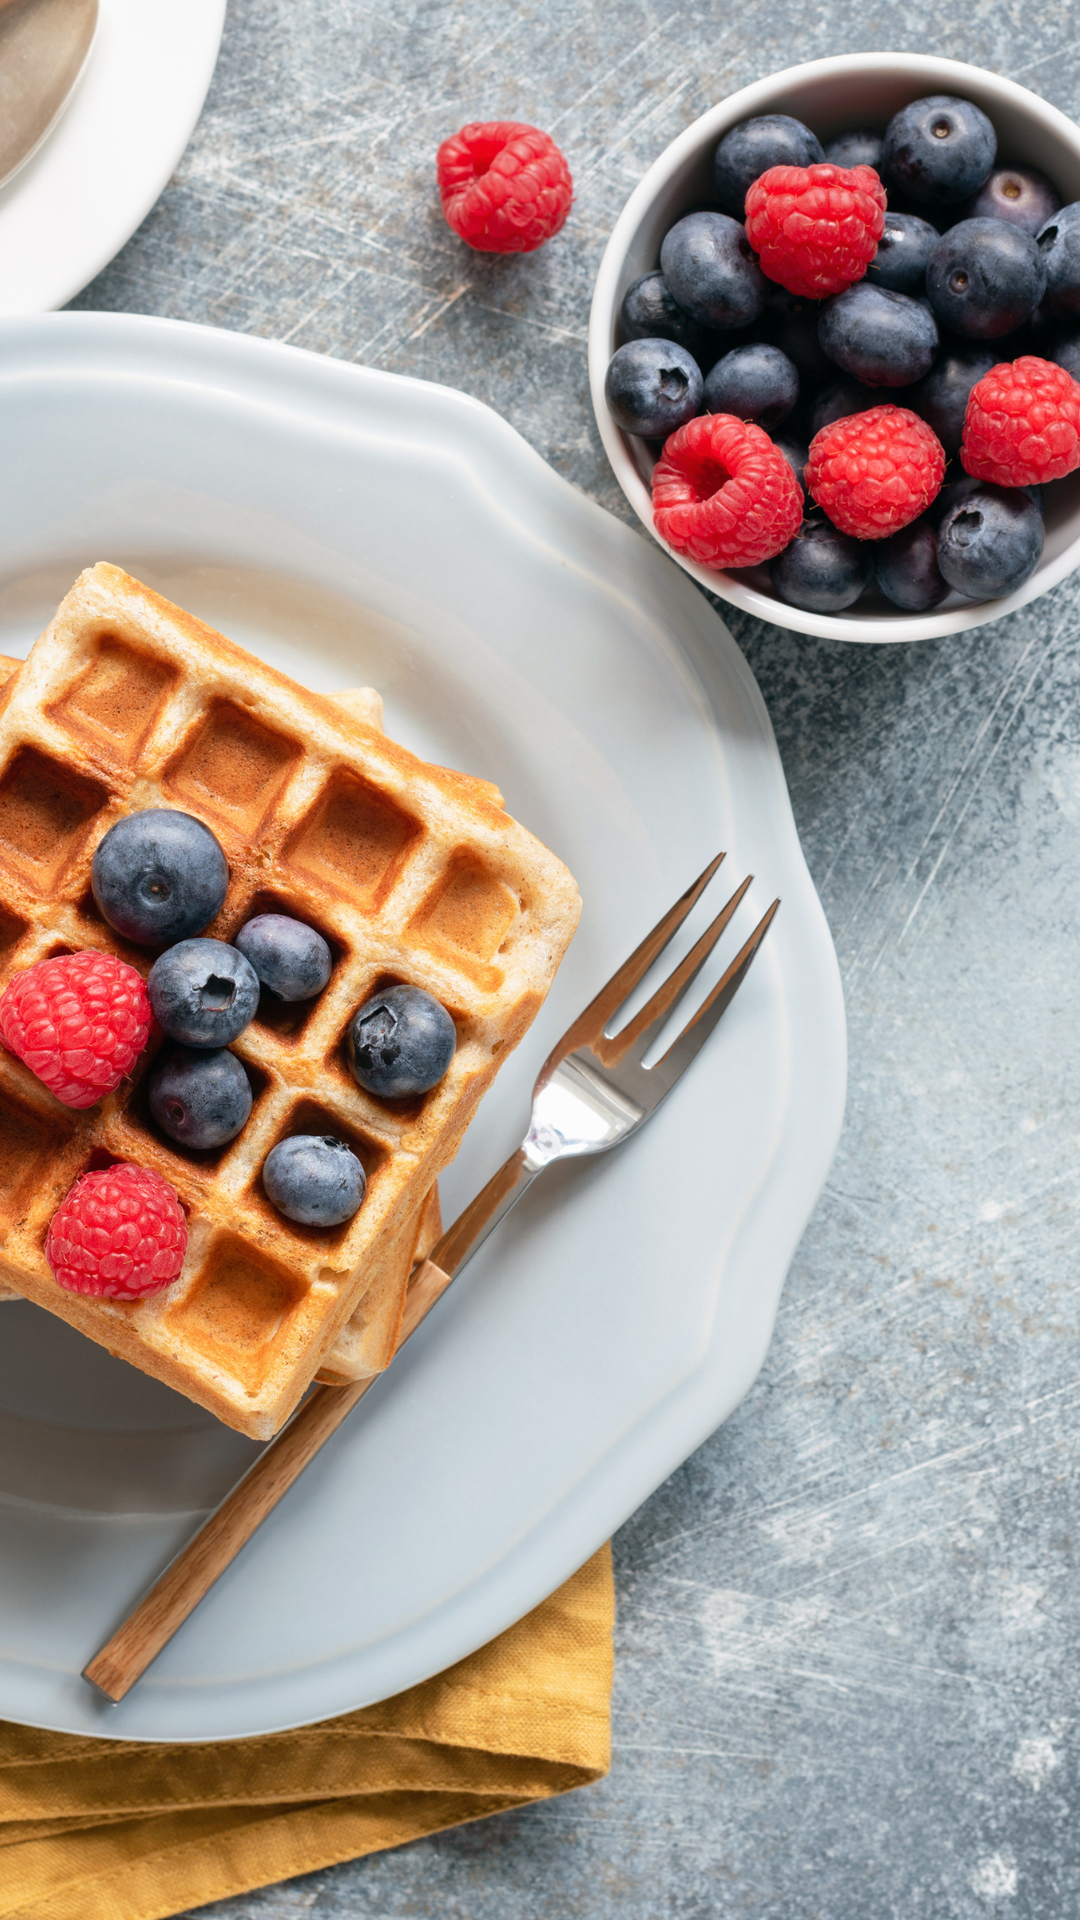 best side dishes for waffles and pancakes